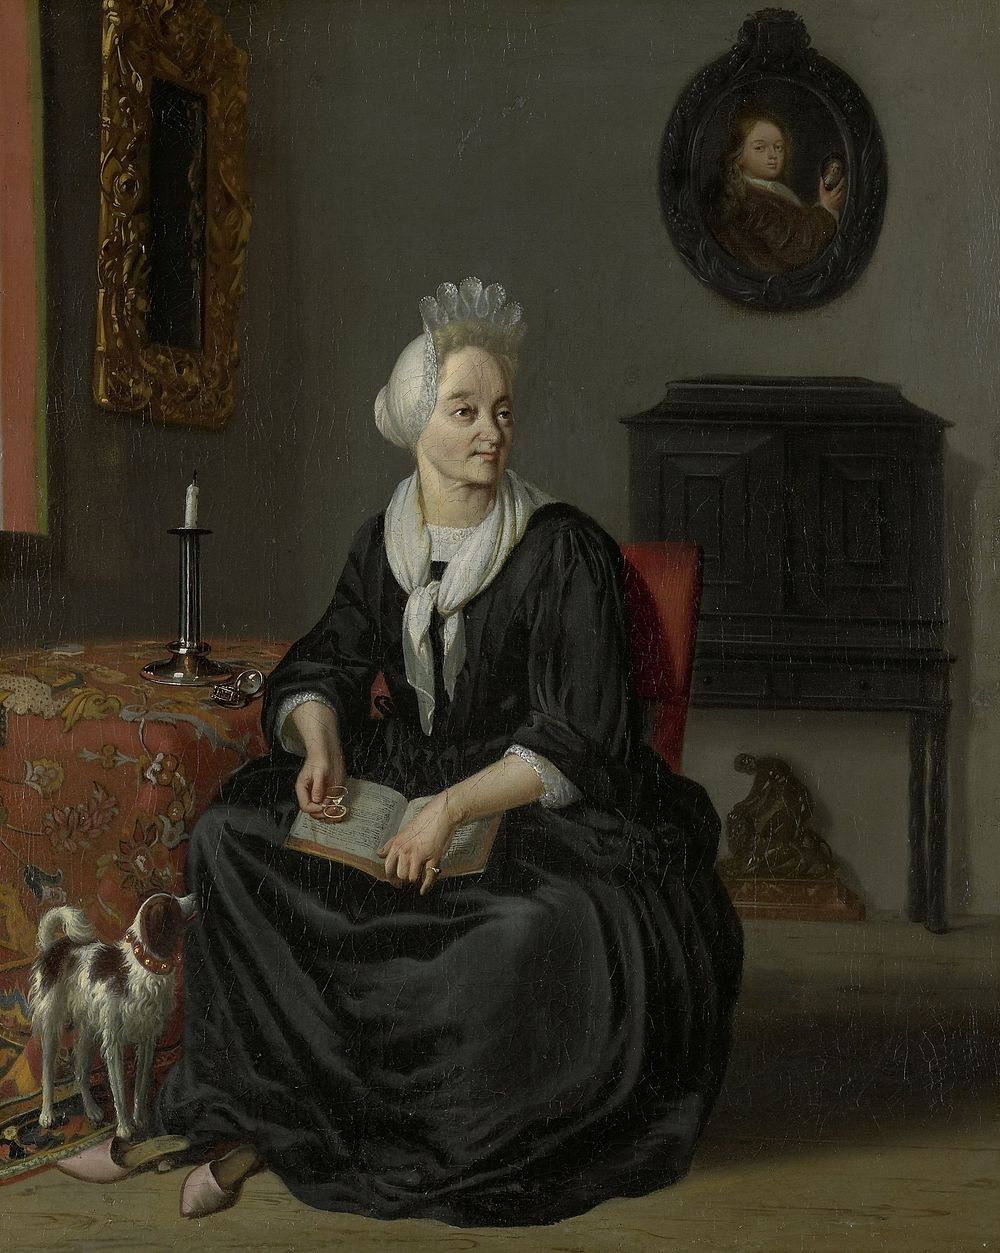 Anna de Hooghe (1645-1717). The Painter's fourth Wife (1693 - 1708) by Ludolf Bakhuysen